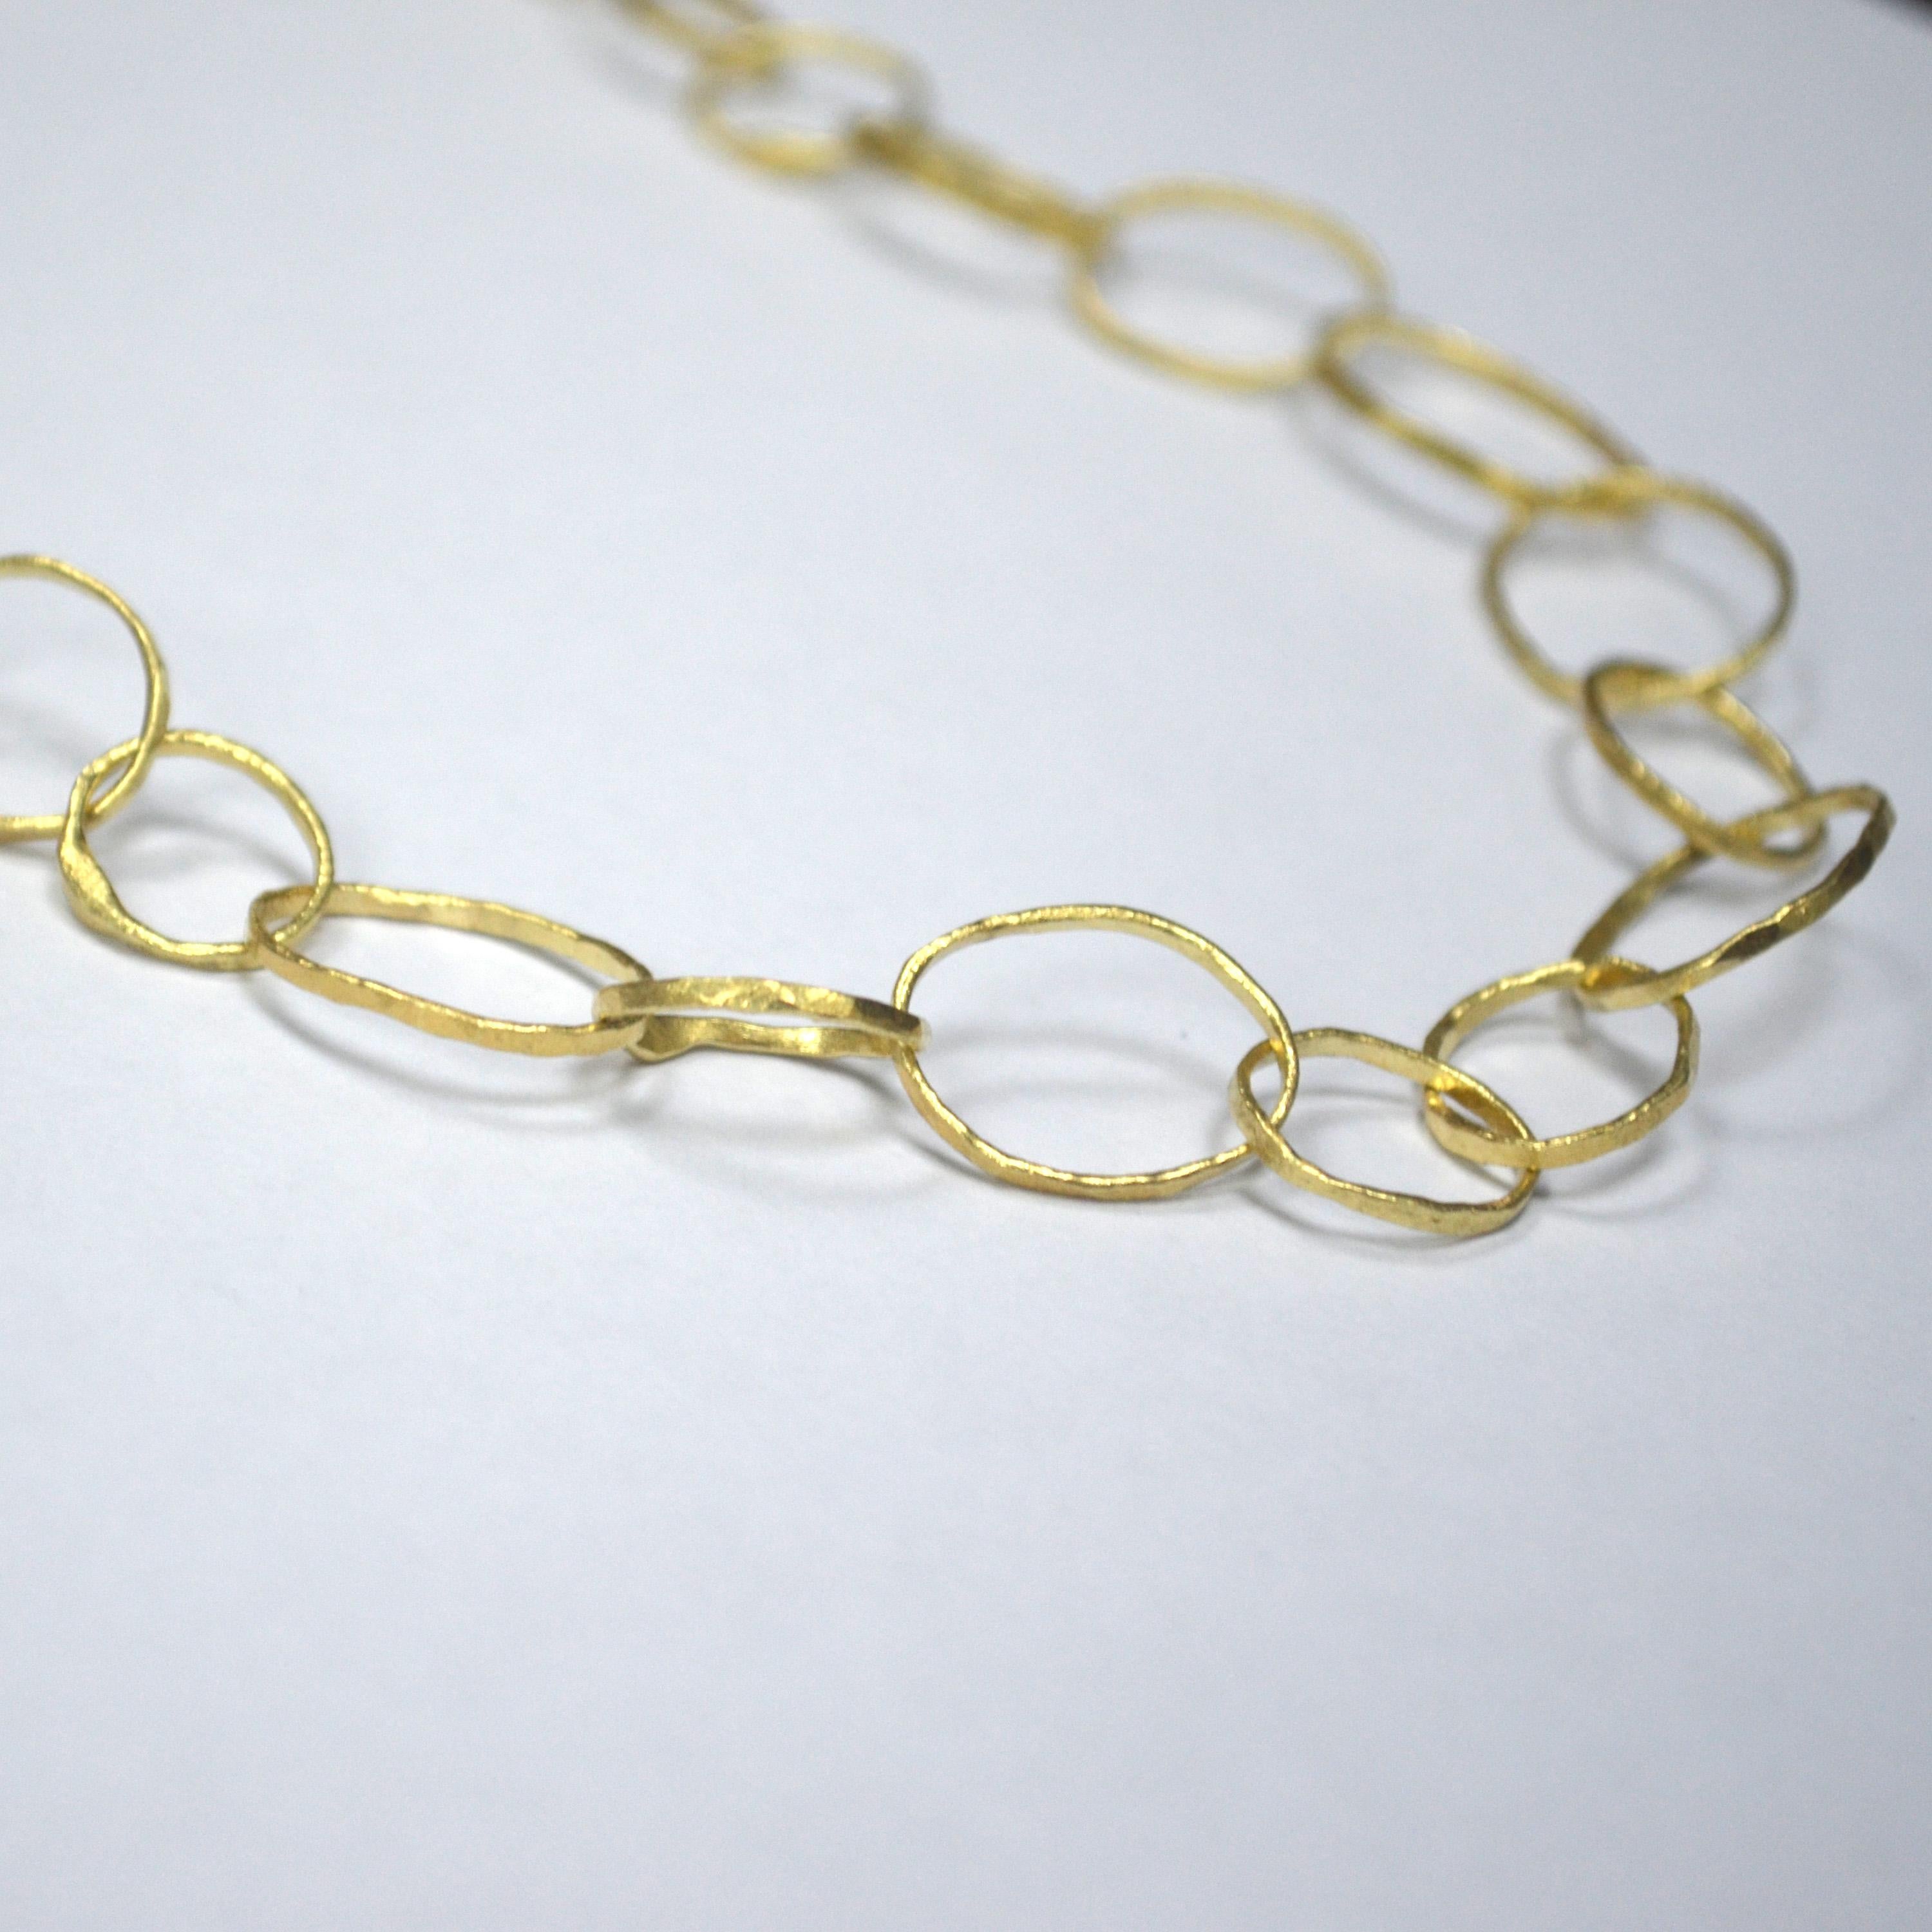 Handmade 18 Karat Gold Organic Texture Chain Necklace by Disa Allsopp In New Condition For Sale In London, GB